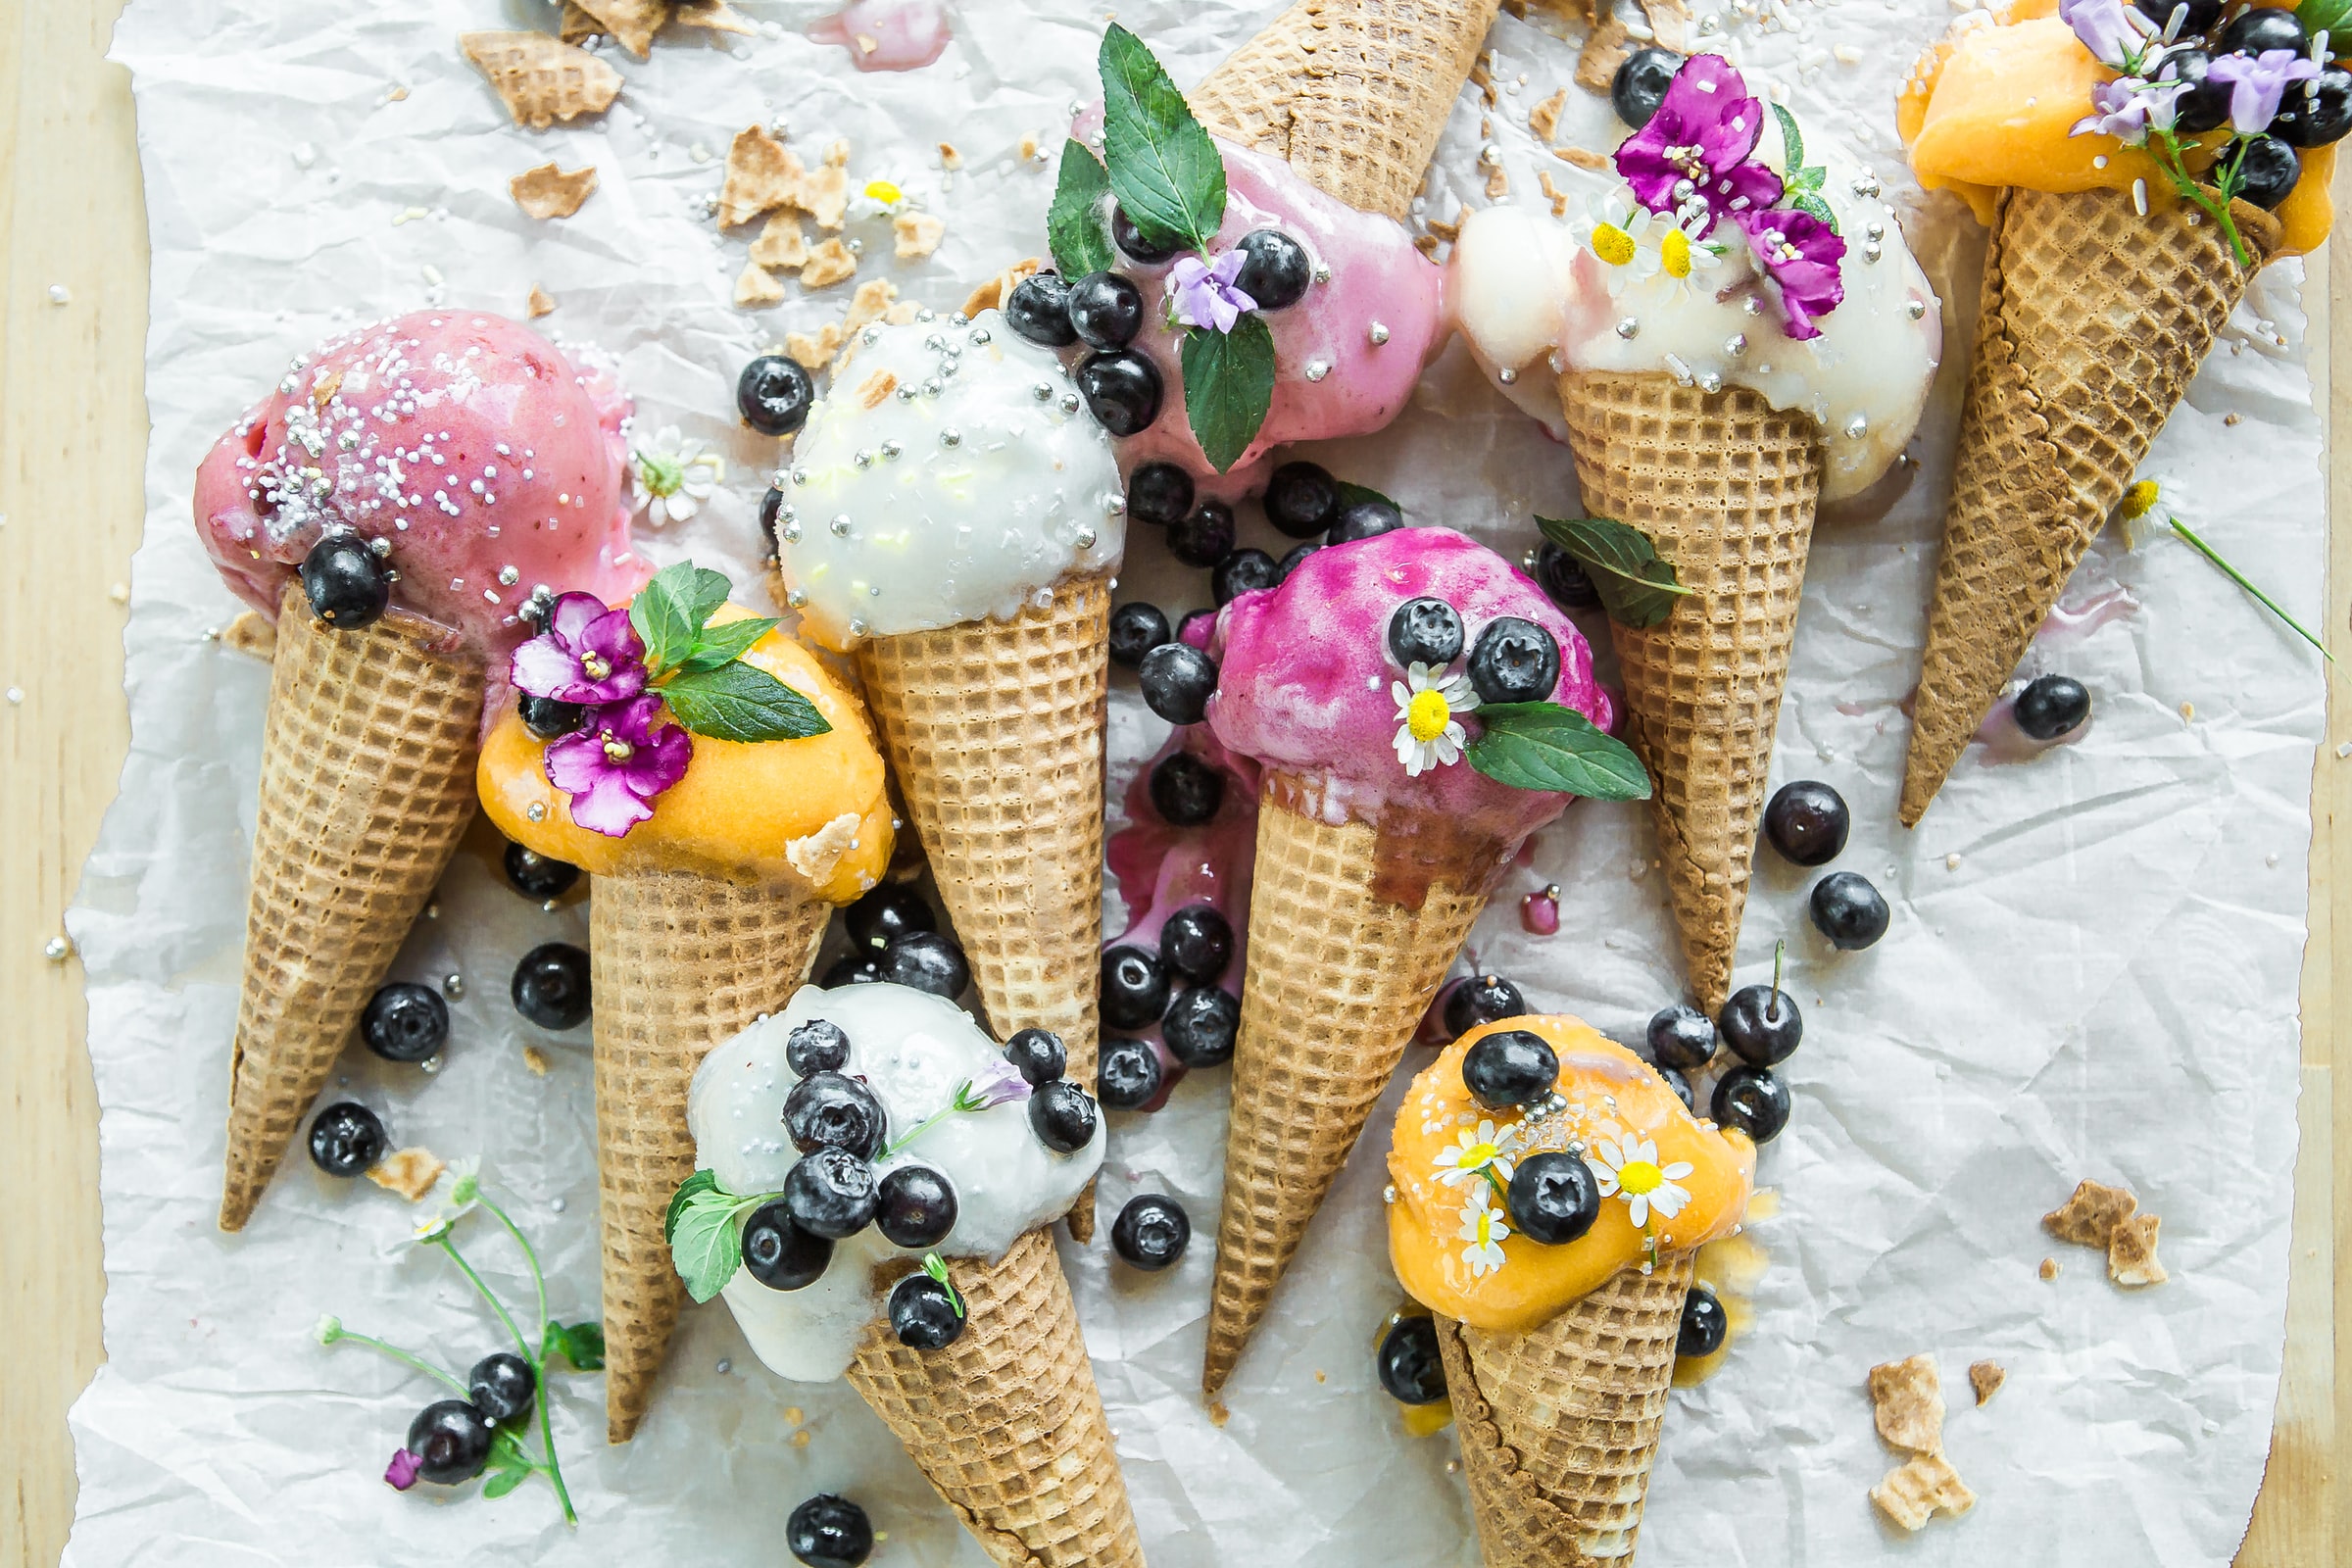 tart an Ice Cream Business - Start Your Own Ice Cream Business With These Easy Steps